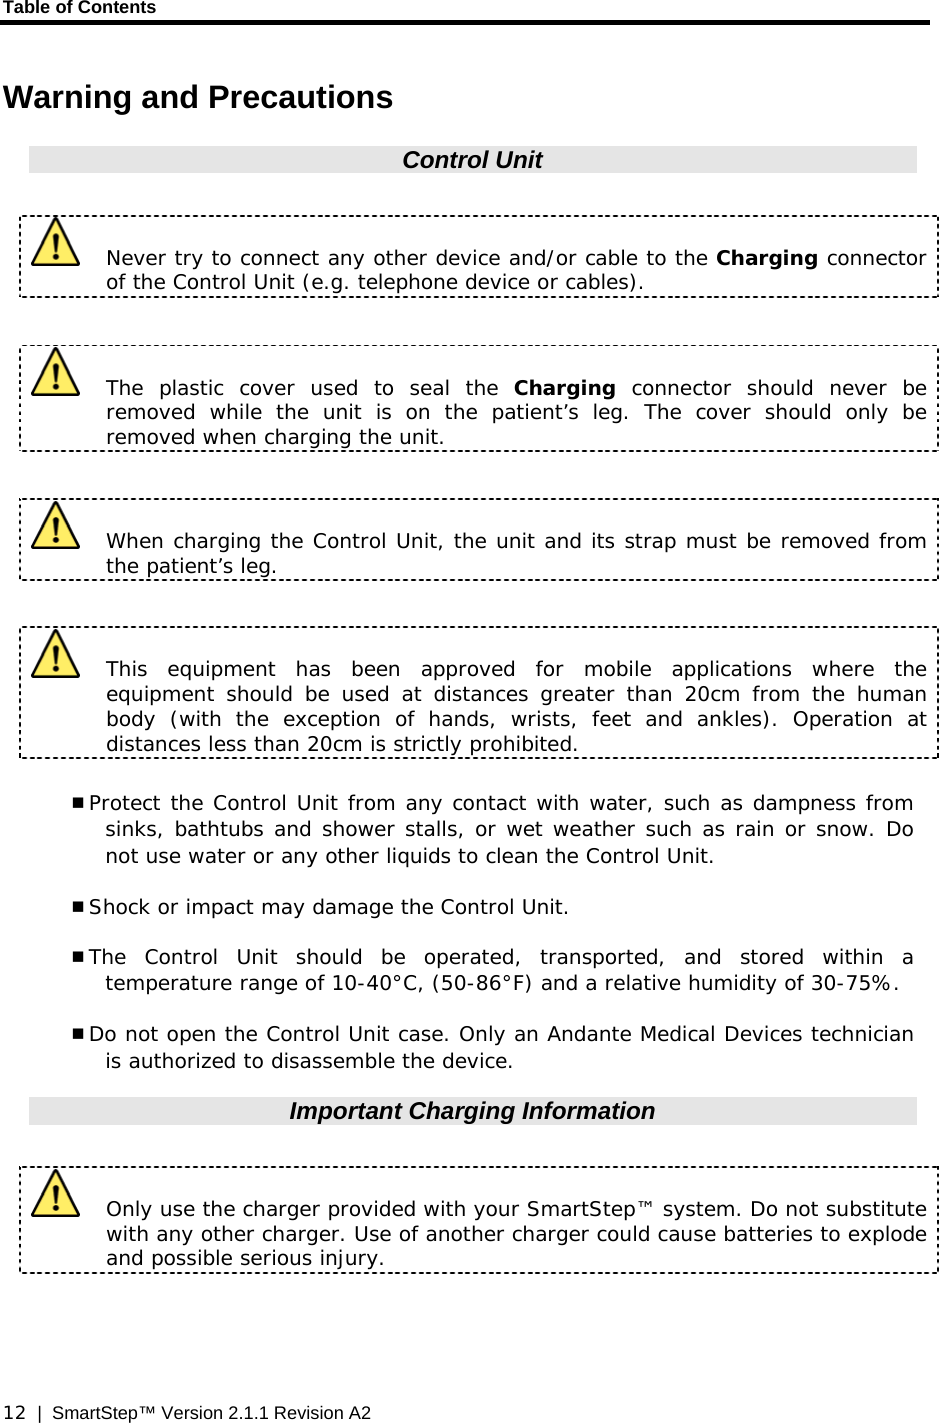 Table of Contents  12  |  SmartStep™ Version 2.1.1 Revision A2 Warning and Precautions Control Unit    Never try to connect any other device and/or cable to the Charging connector of the Control Unit (e.g. telephone device or cables).   The plastic cover used to seal the Charging  connector should never be removed while the unit is on the patient’s leg. The cover should only be removed when charging the unit.     When charging the Control Unit, the unit and its strap must be removed from the patient’s leg.    This equipment has been approved for mobile applications where the equipment should be used at distances greater than 20cm from the human body (with the exception of hands, wrists, feet and ankles). Operation at distances less than 20cm is strictly prohibited.  Protect the Control Unit from any contact with water, such as dampness from sinks, bathtubs and shower stalls, or wet weather such as rain or snow. Do not use water or any other liquids to clean the Control Unit.  Shock or impact may damage the Control Unit.  The Control Unit should be operated, transported, and stored within a temperature range of 10-40°C, (50-86°F) and a relative humidity of 30-75%.  Do not open the Control Unit case. Only an Andante Medical Devices technician is authorized to disassemble the device. Important Charging Information    Only use the charger provided with your SmartStep™ system. Do not substitute with any other charger. Use of another charger could cause batteries to explode and possible serious injury.  